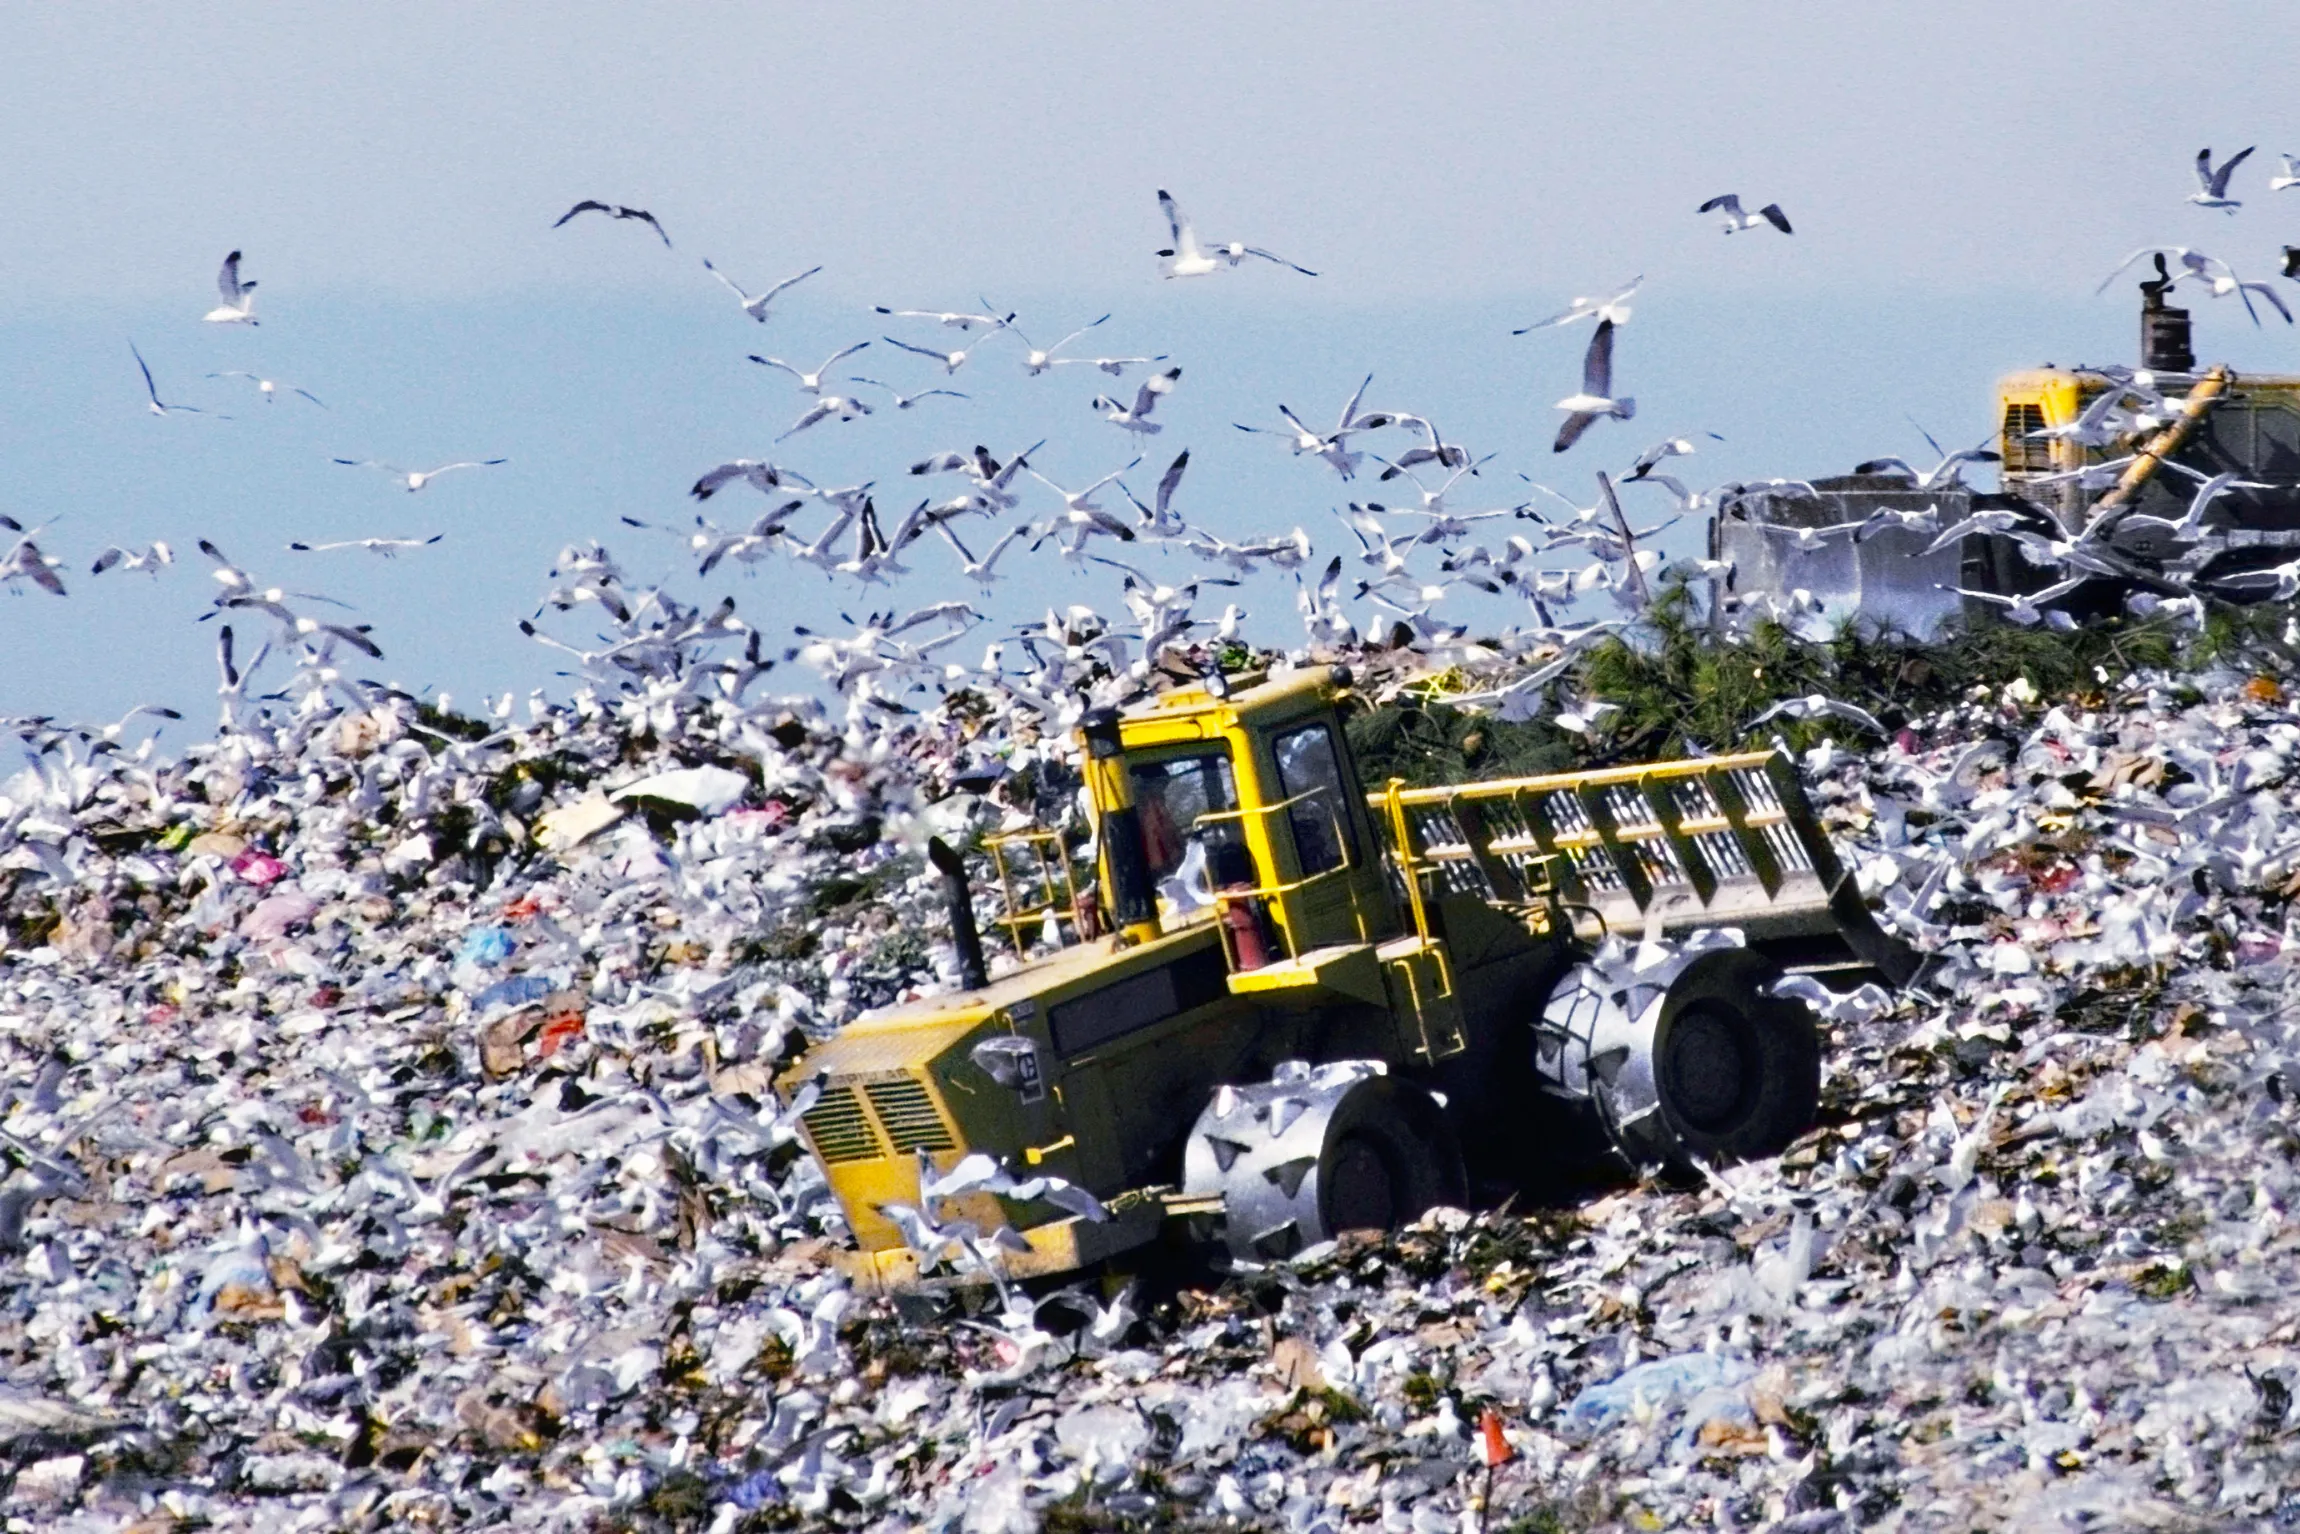 methane-emissions-from-landfills